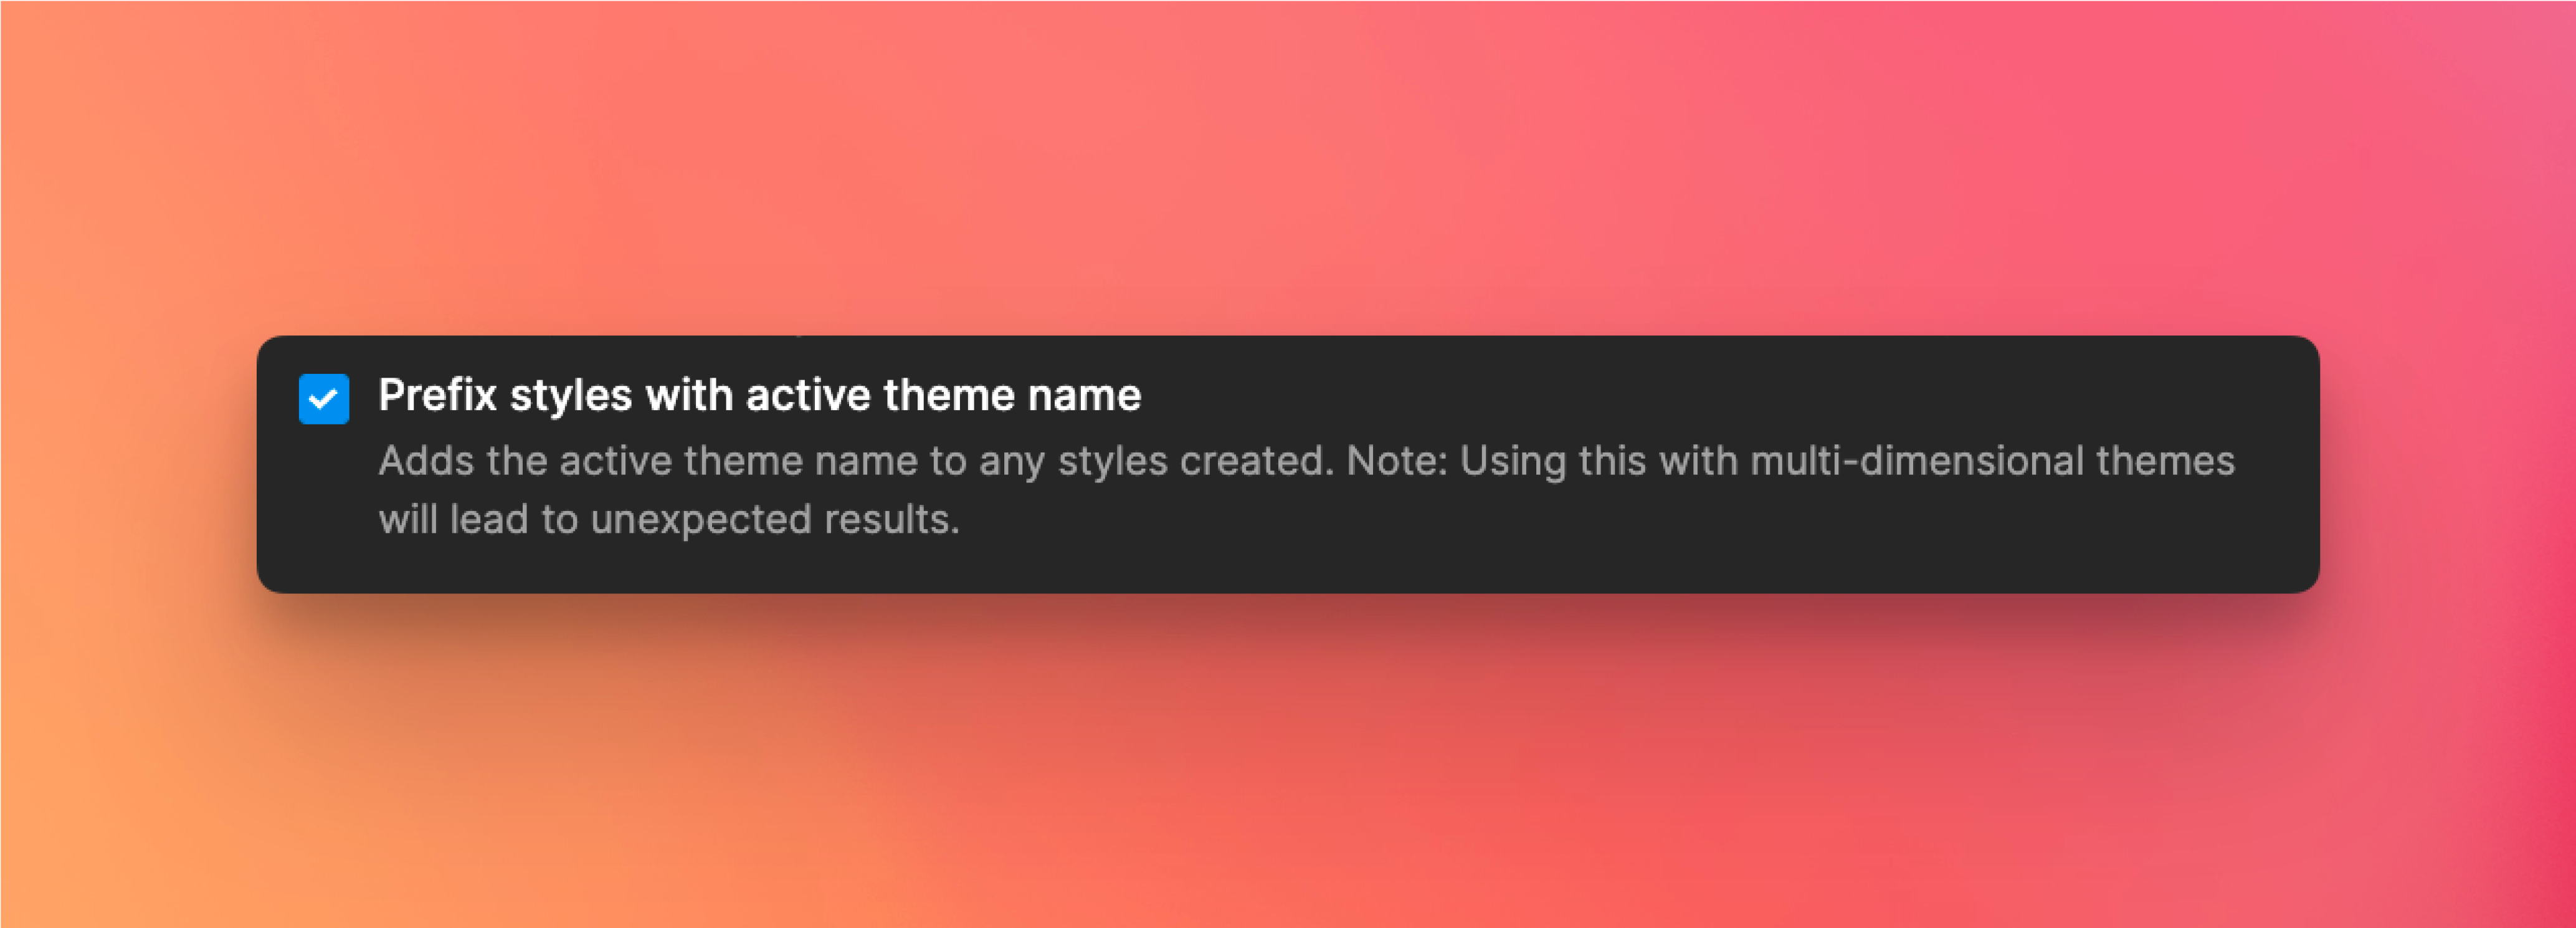 Prefix styles with active theme name - step 2